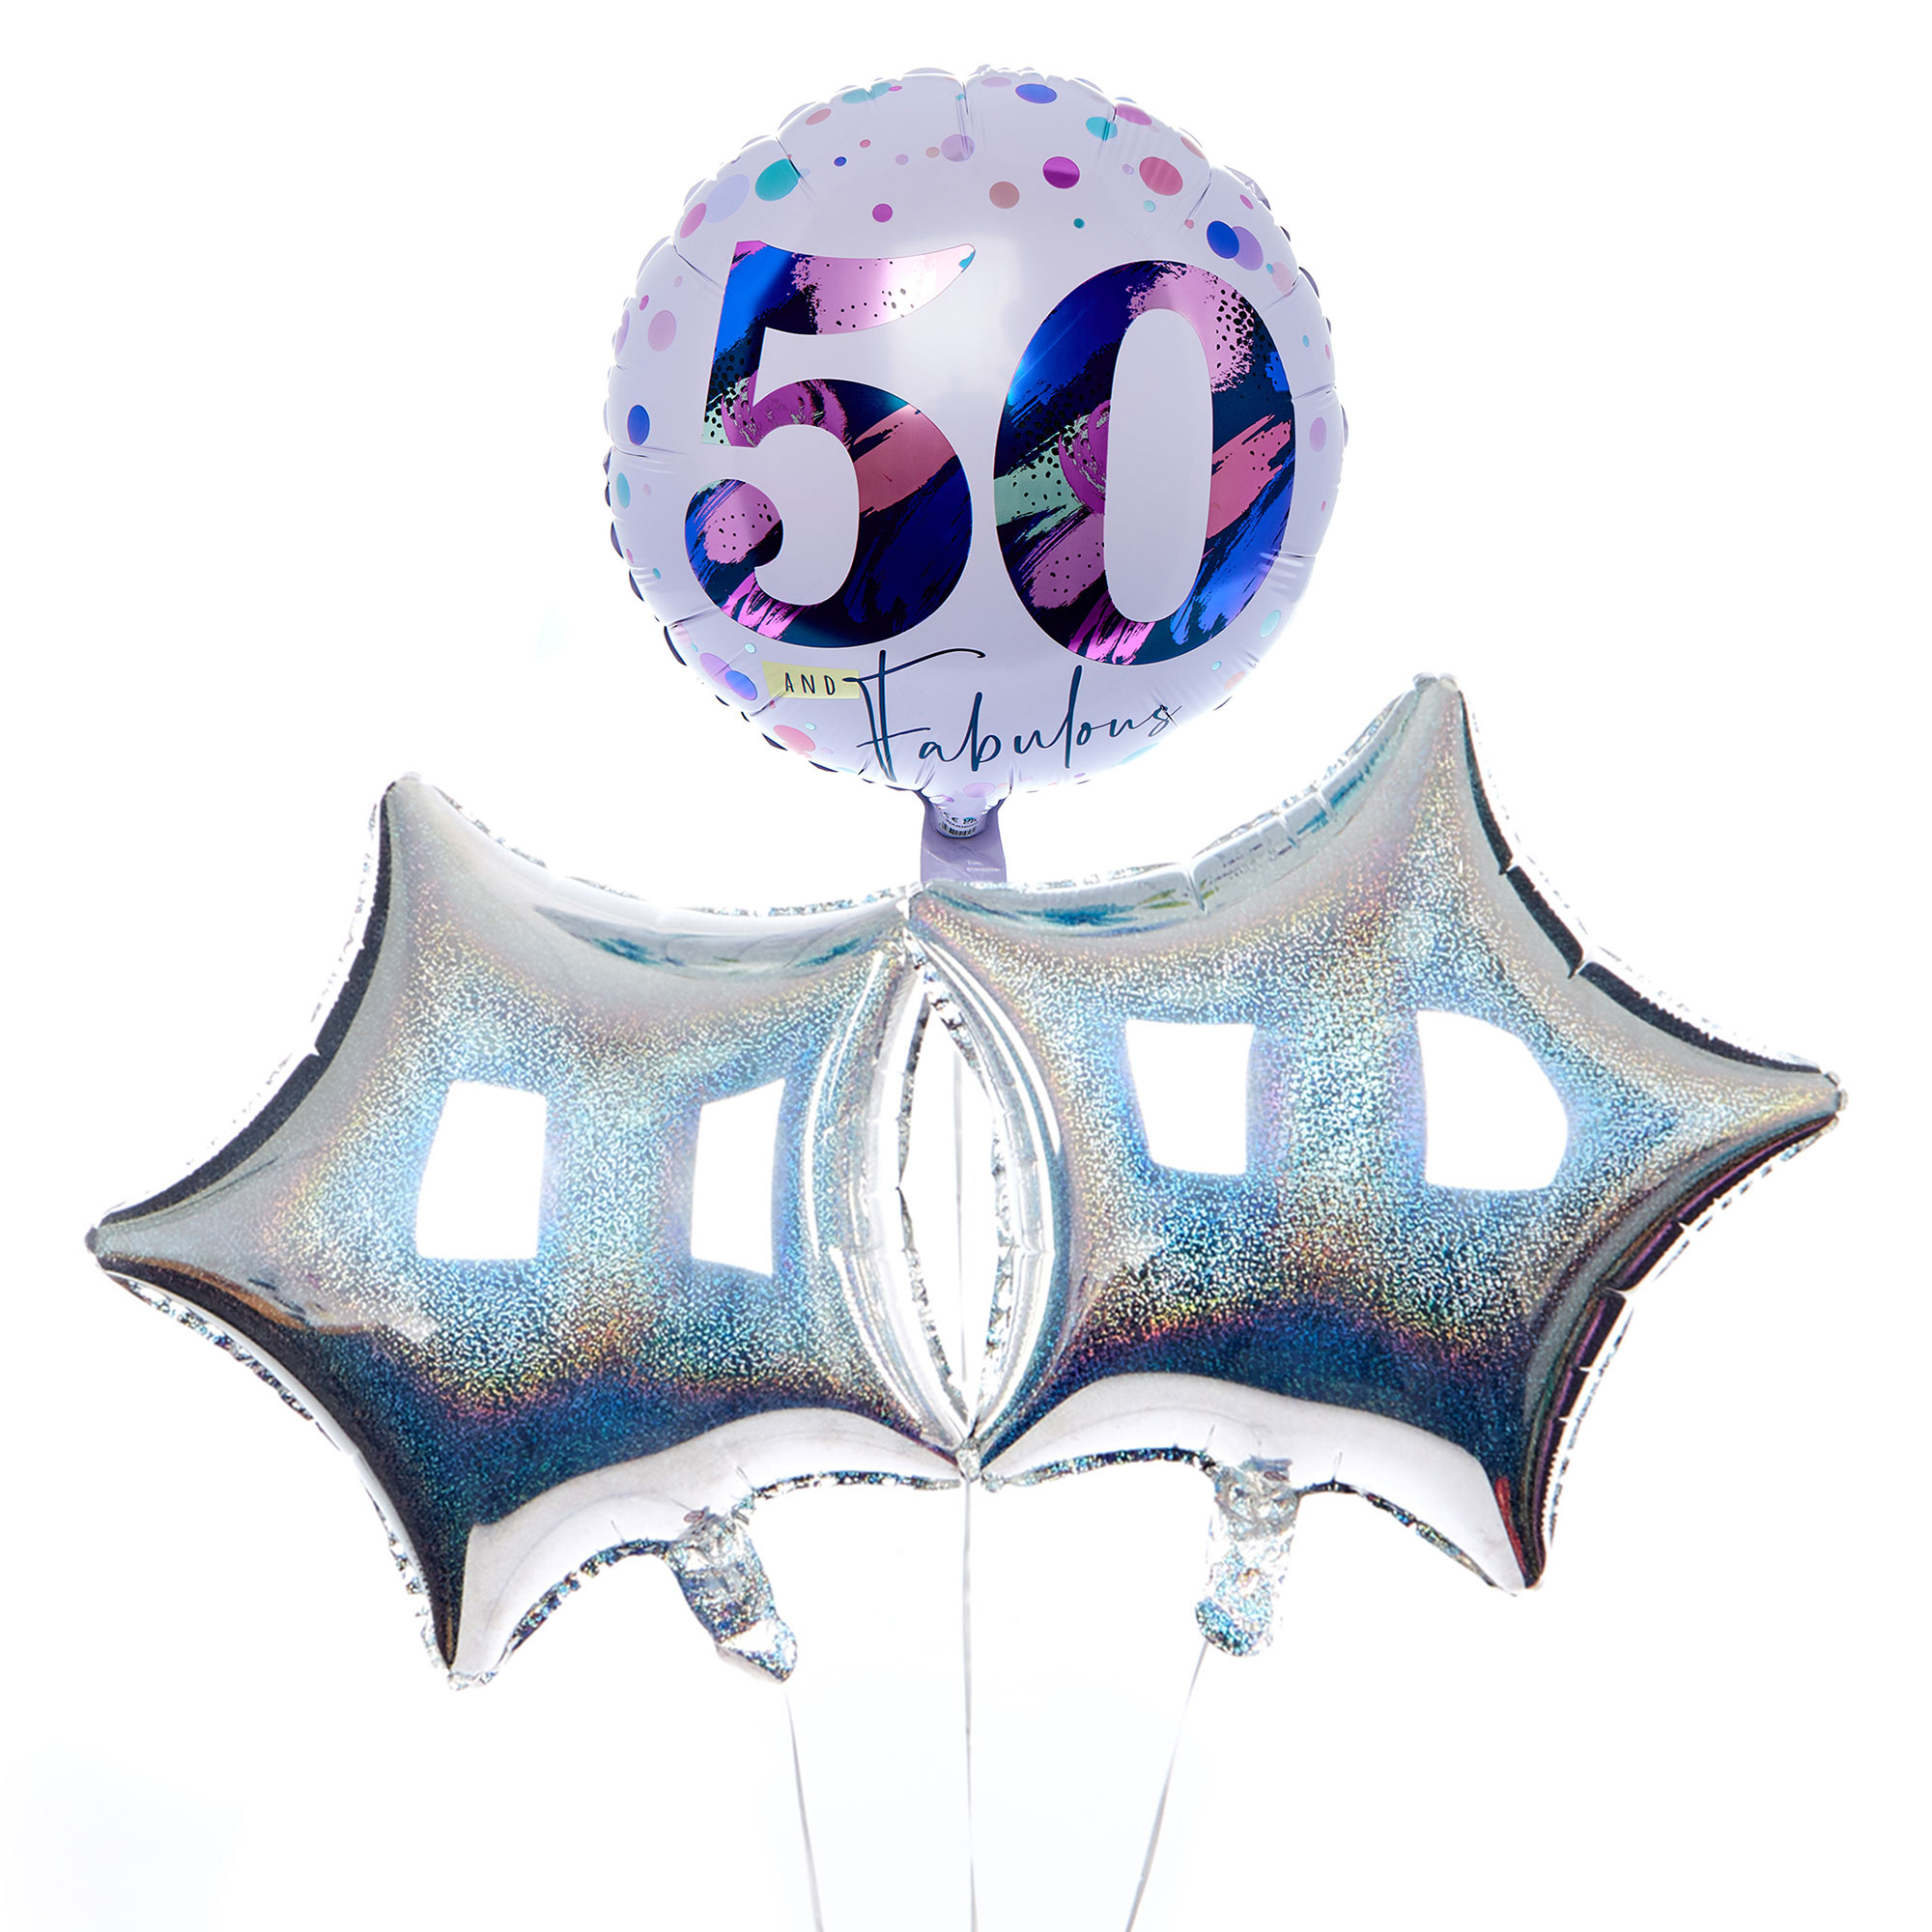 50 & Fabulous Balloon Bouquet - DELIVERED INFLATED!